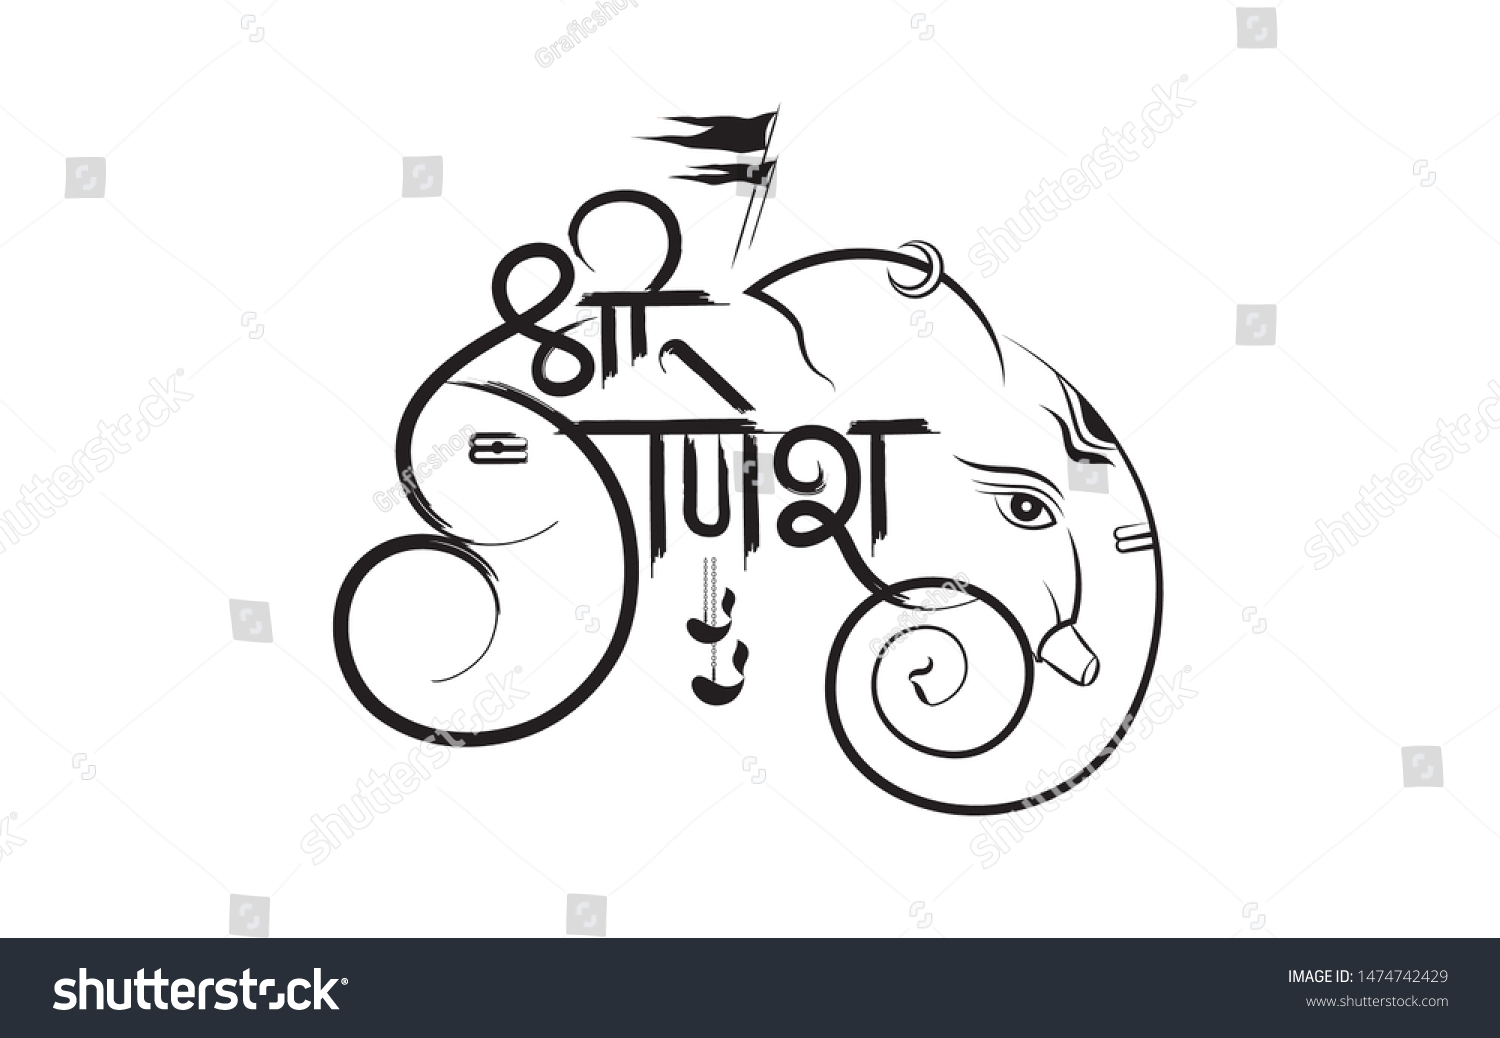 Indian Religious Festival Ganesh Chaturthi Template Stock Vector ...